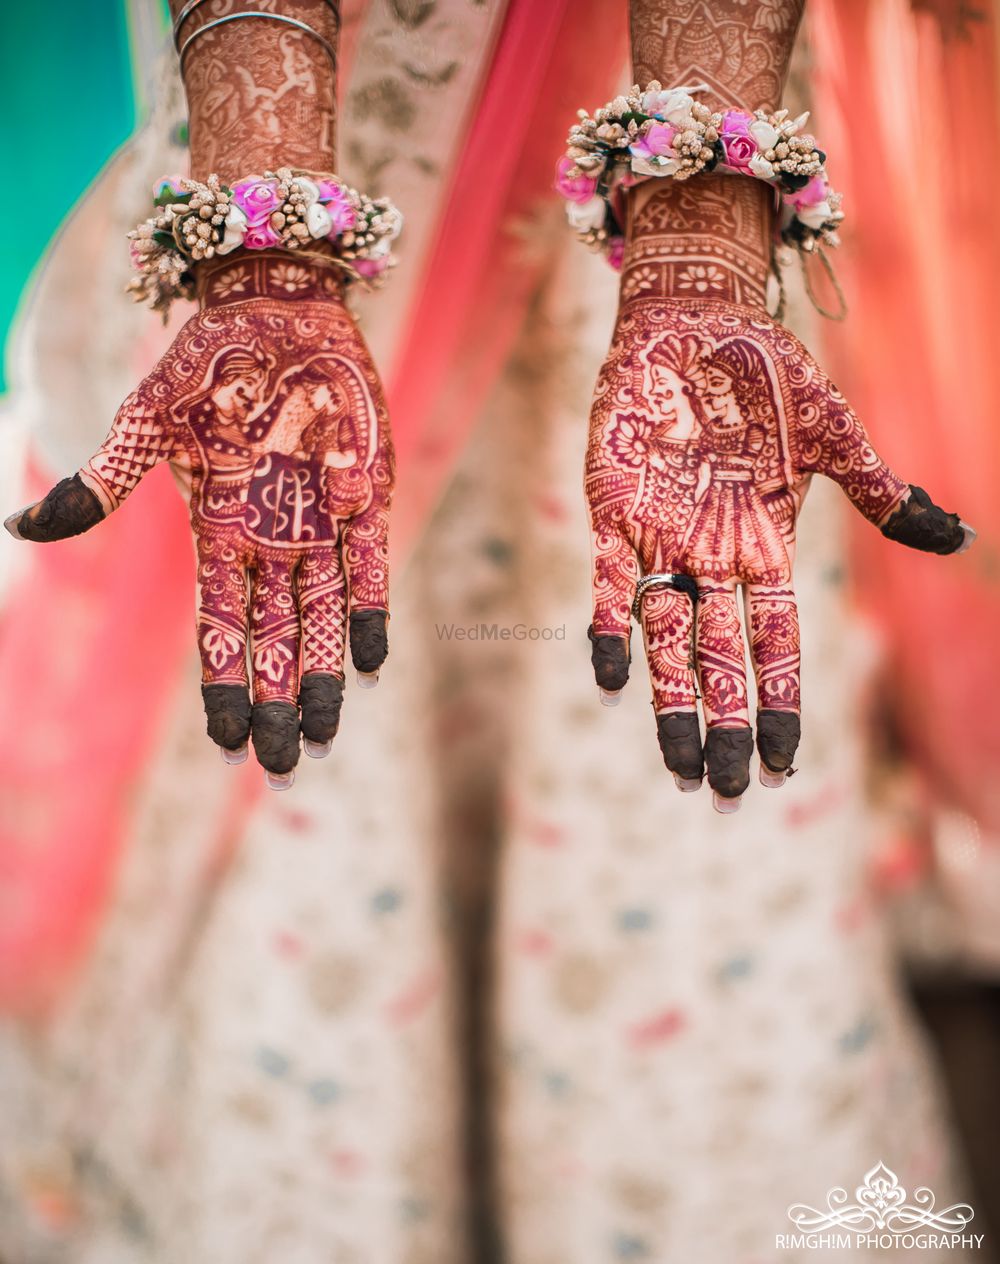 Photo of Mehendi hands with portraits and floral hand jewellery